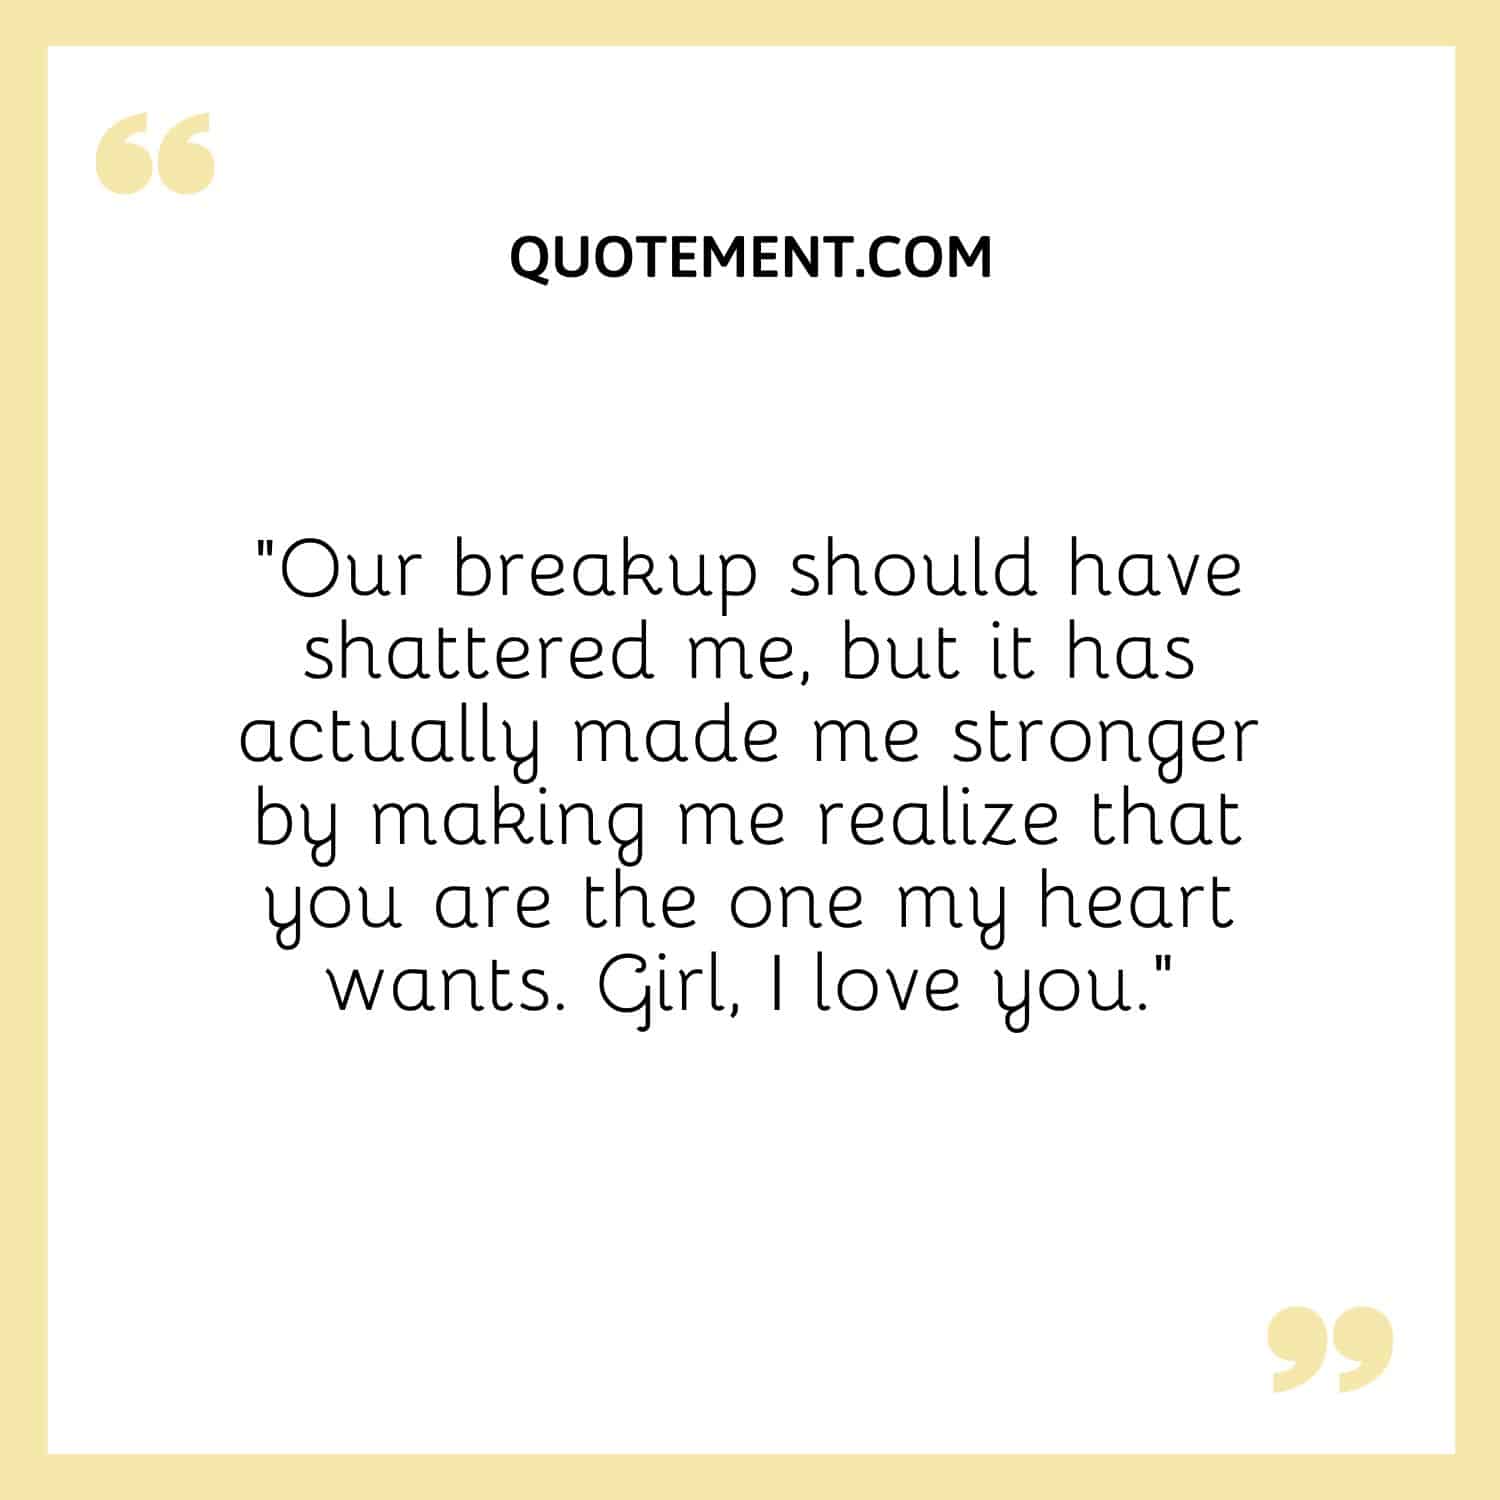 Our breakup should have shattered me, but it has actually made me stronger